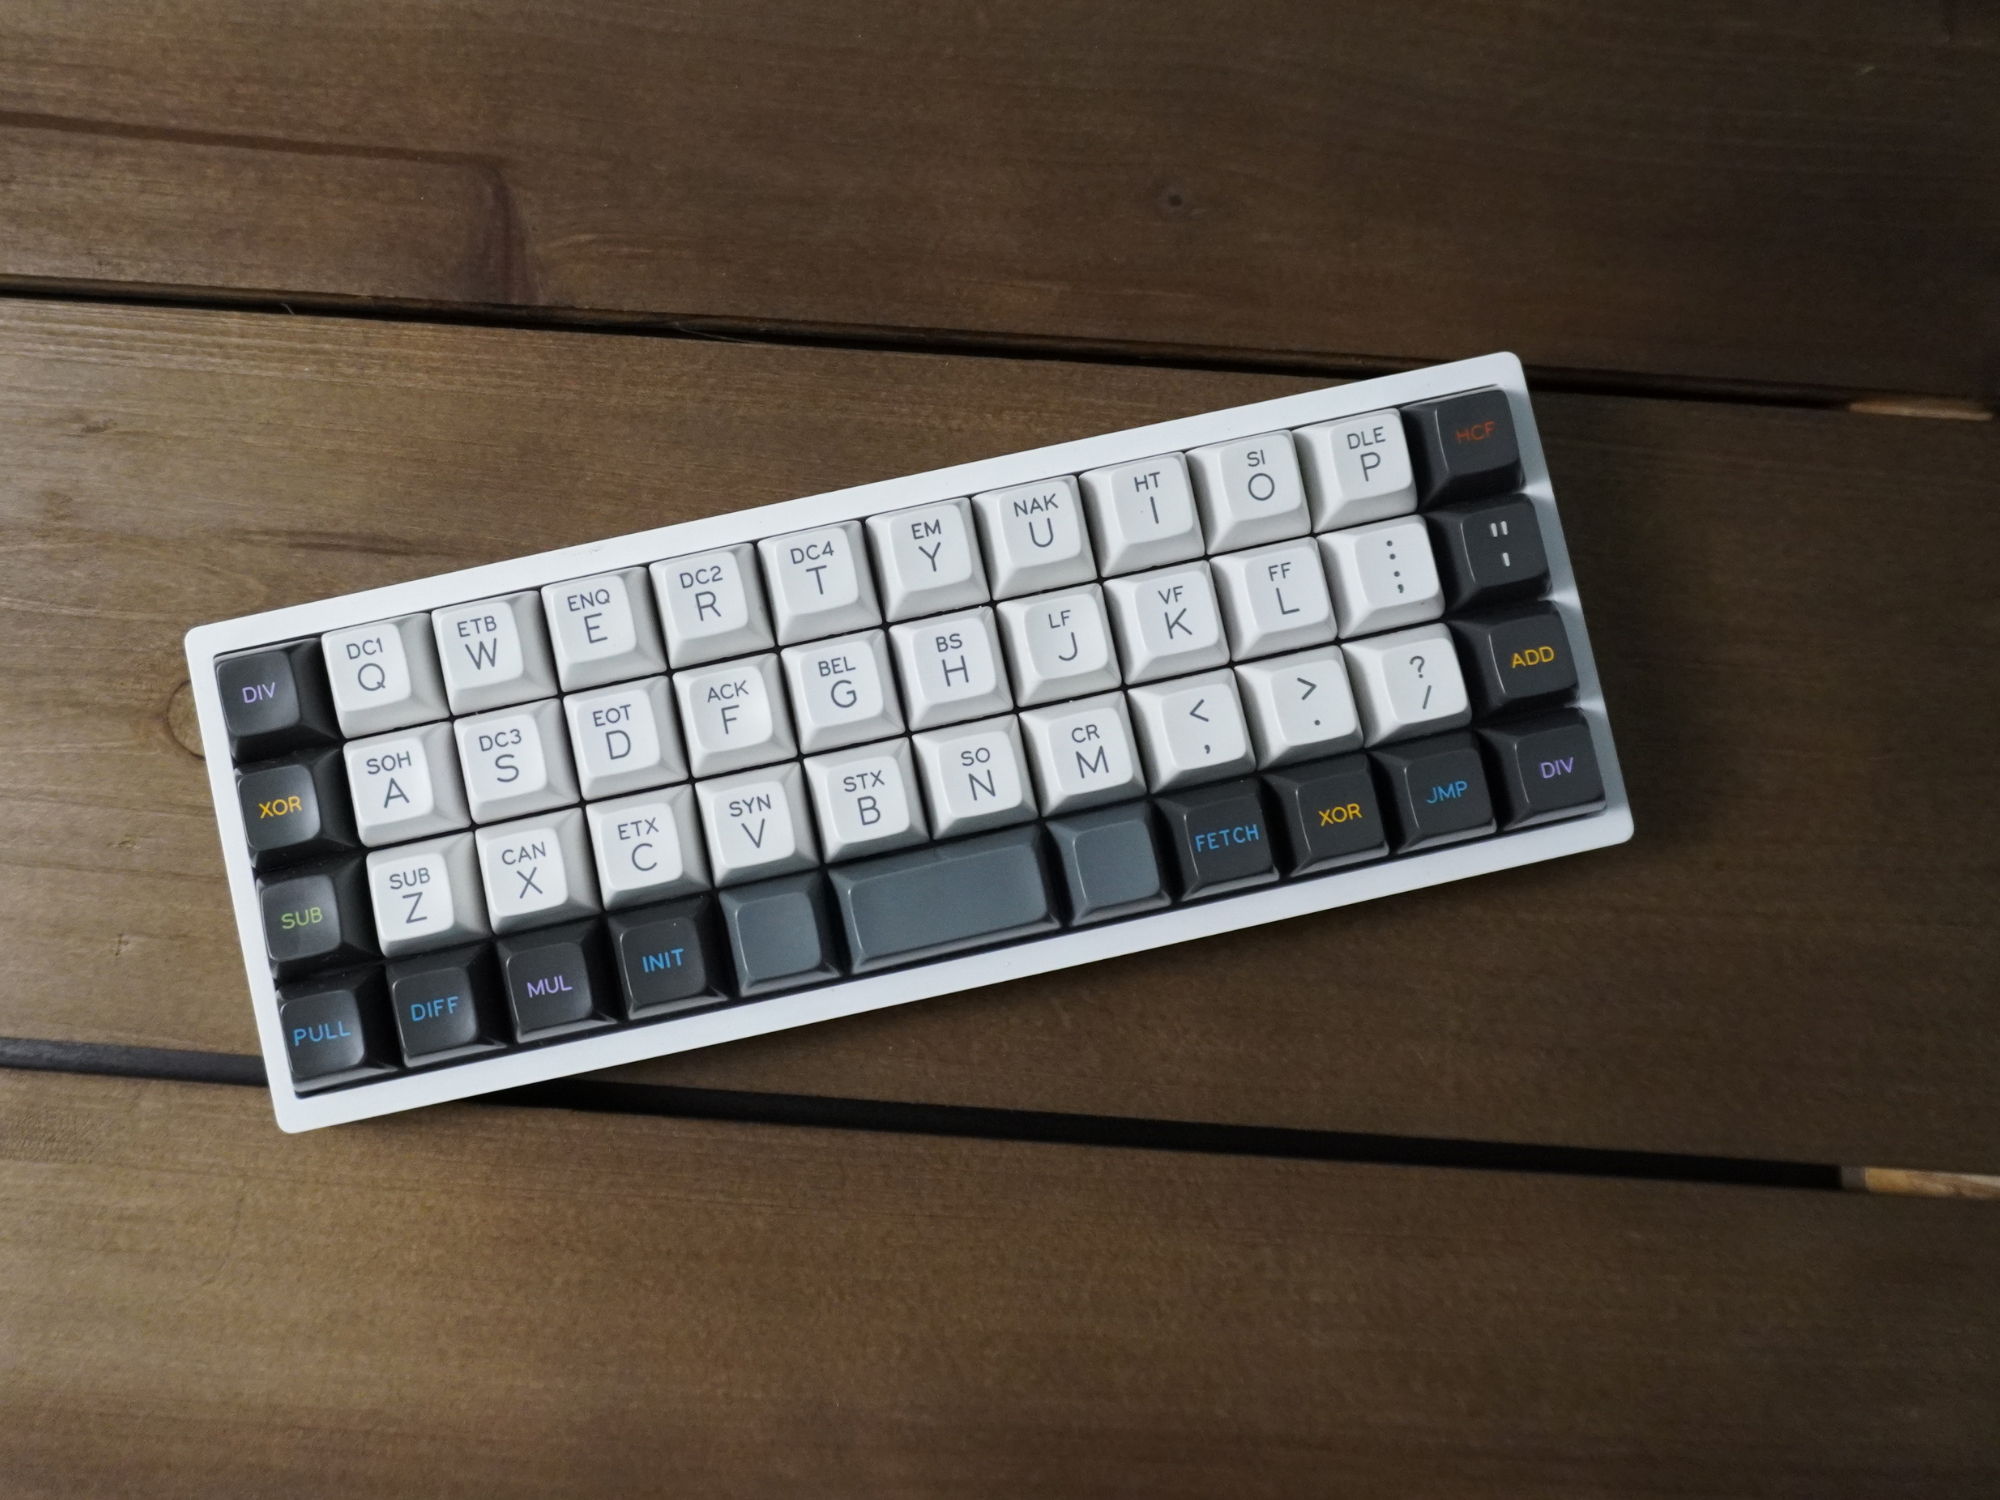 CSTC40 Ortholinear Keyboard Review